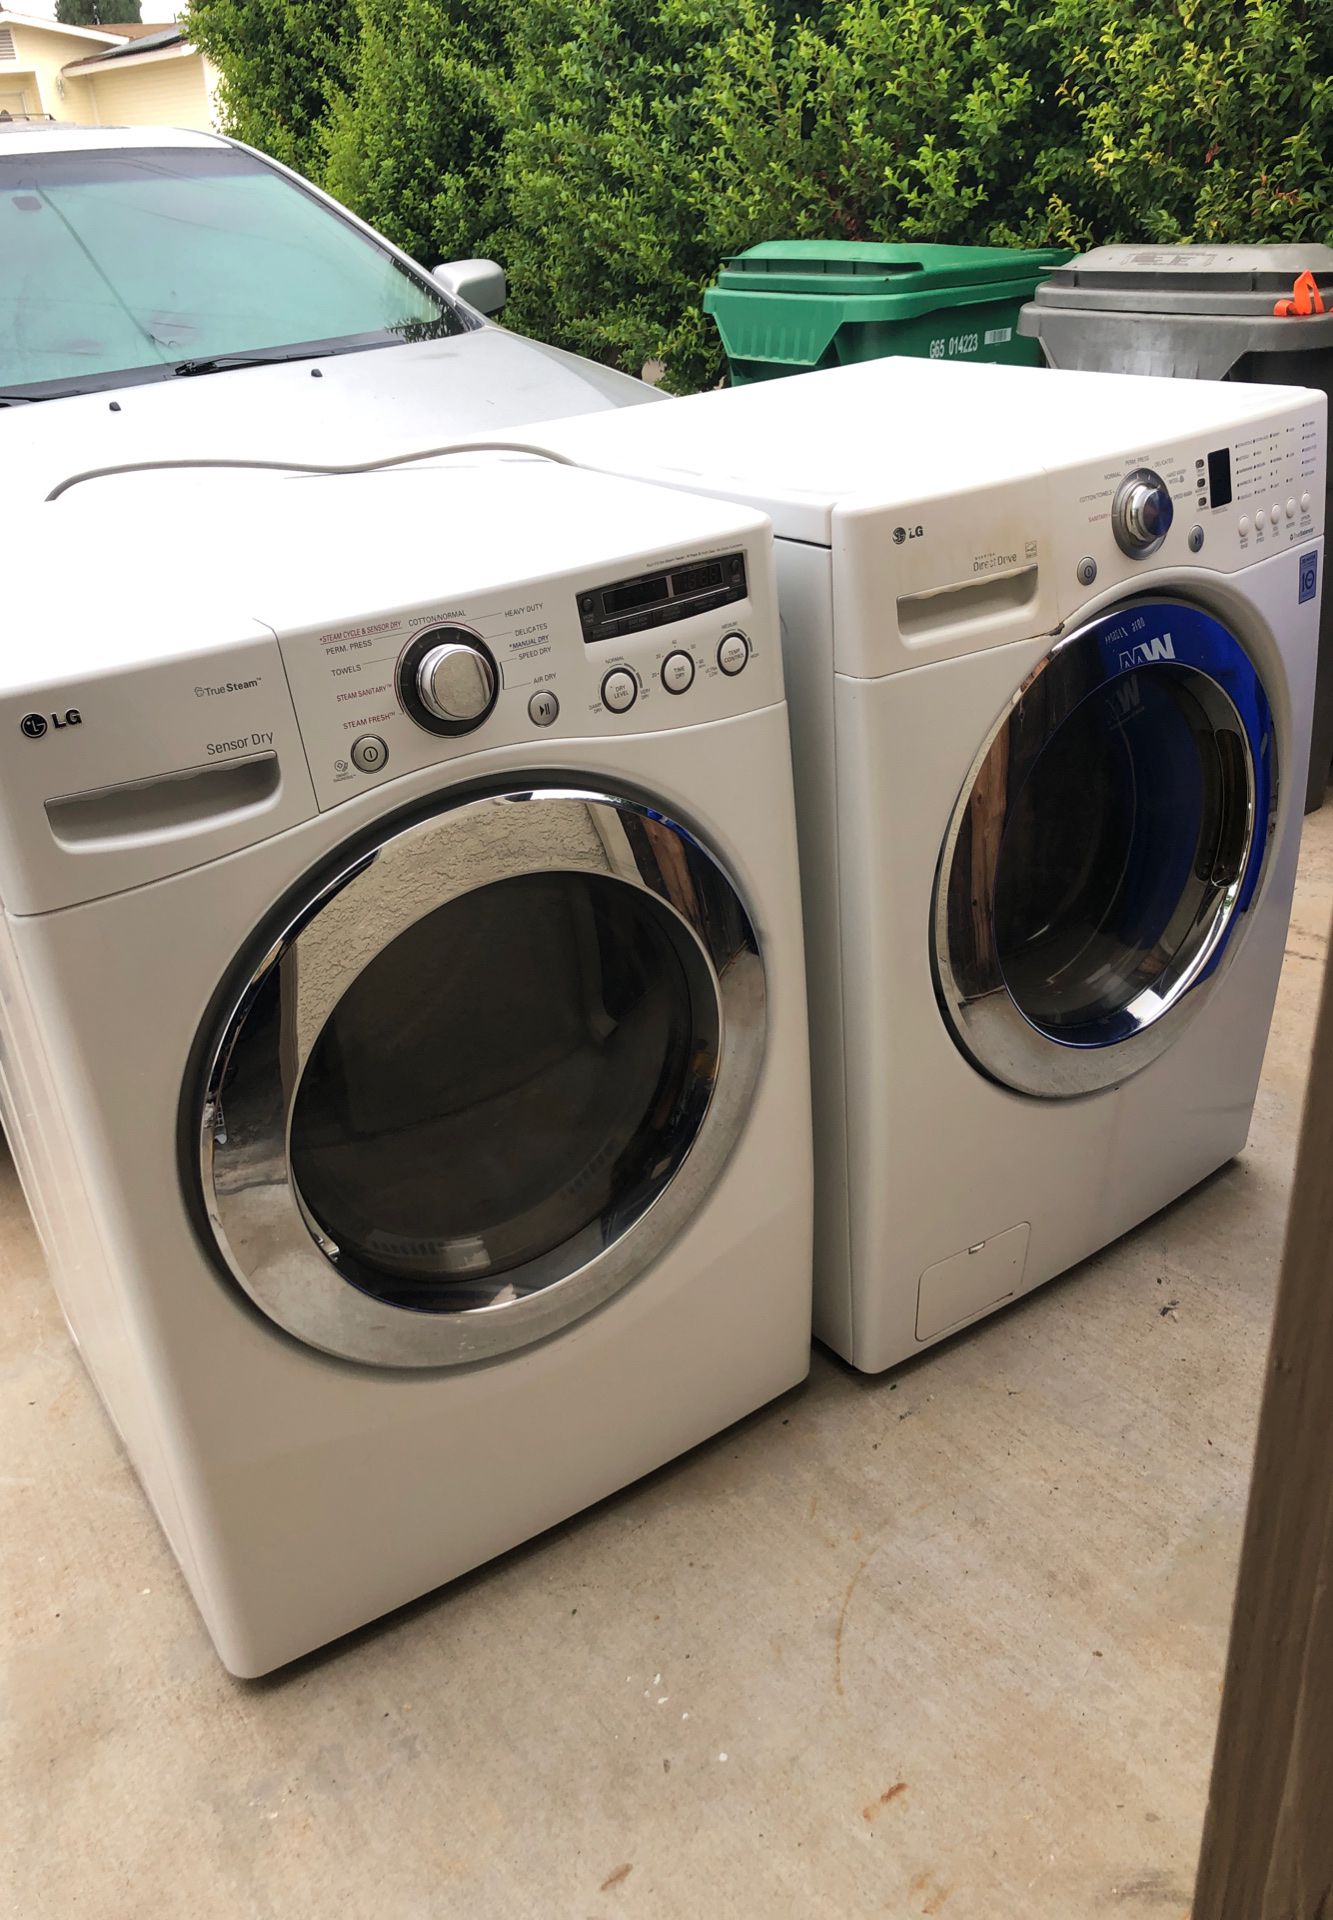 Lg front loader and dryer in good working condition but the washer has a small leak in door for free.